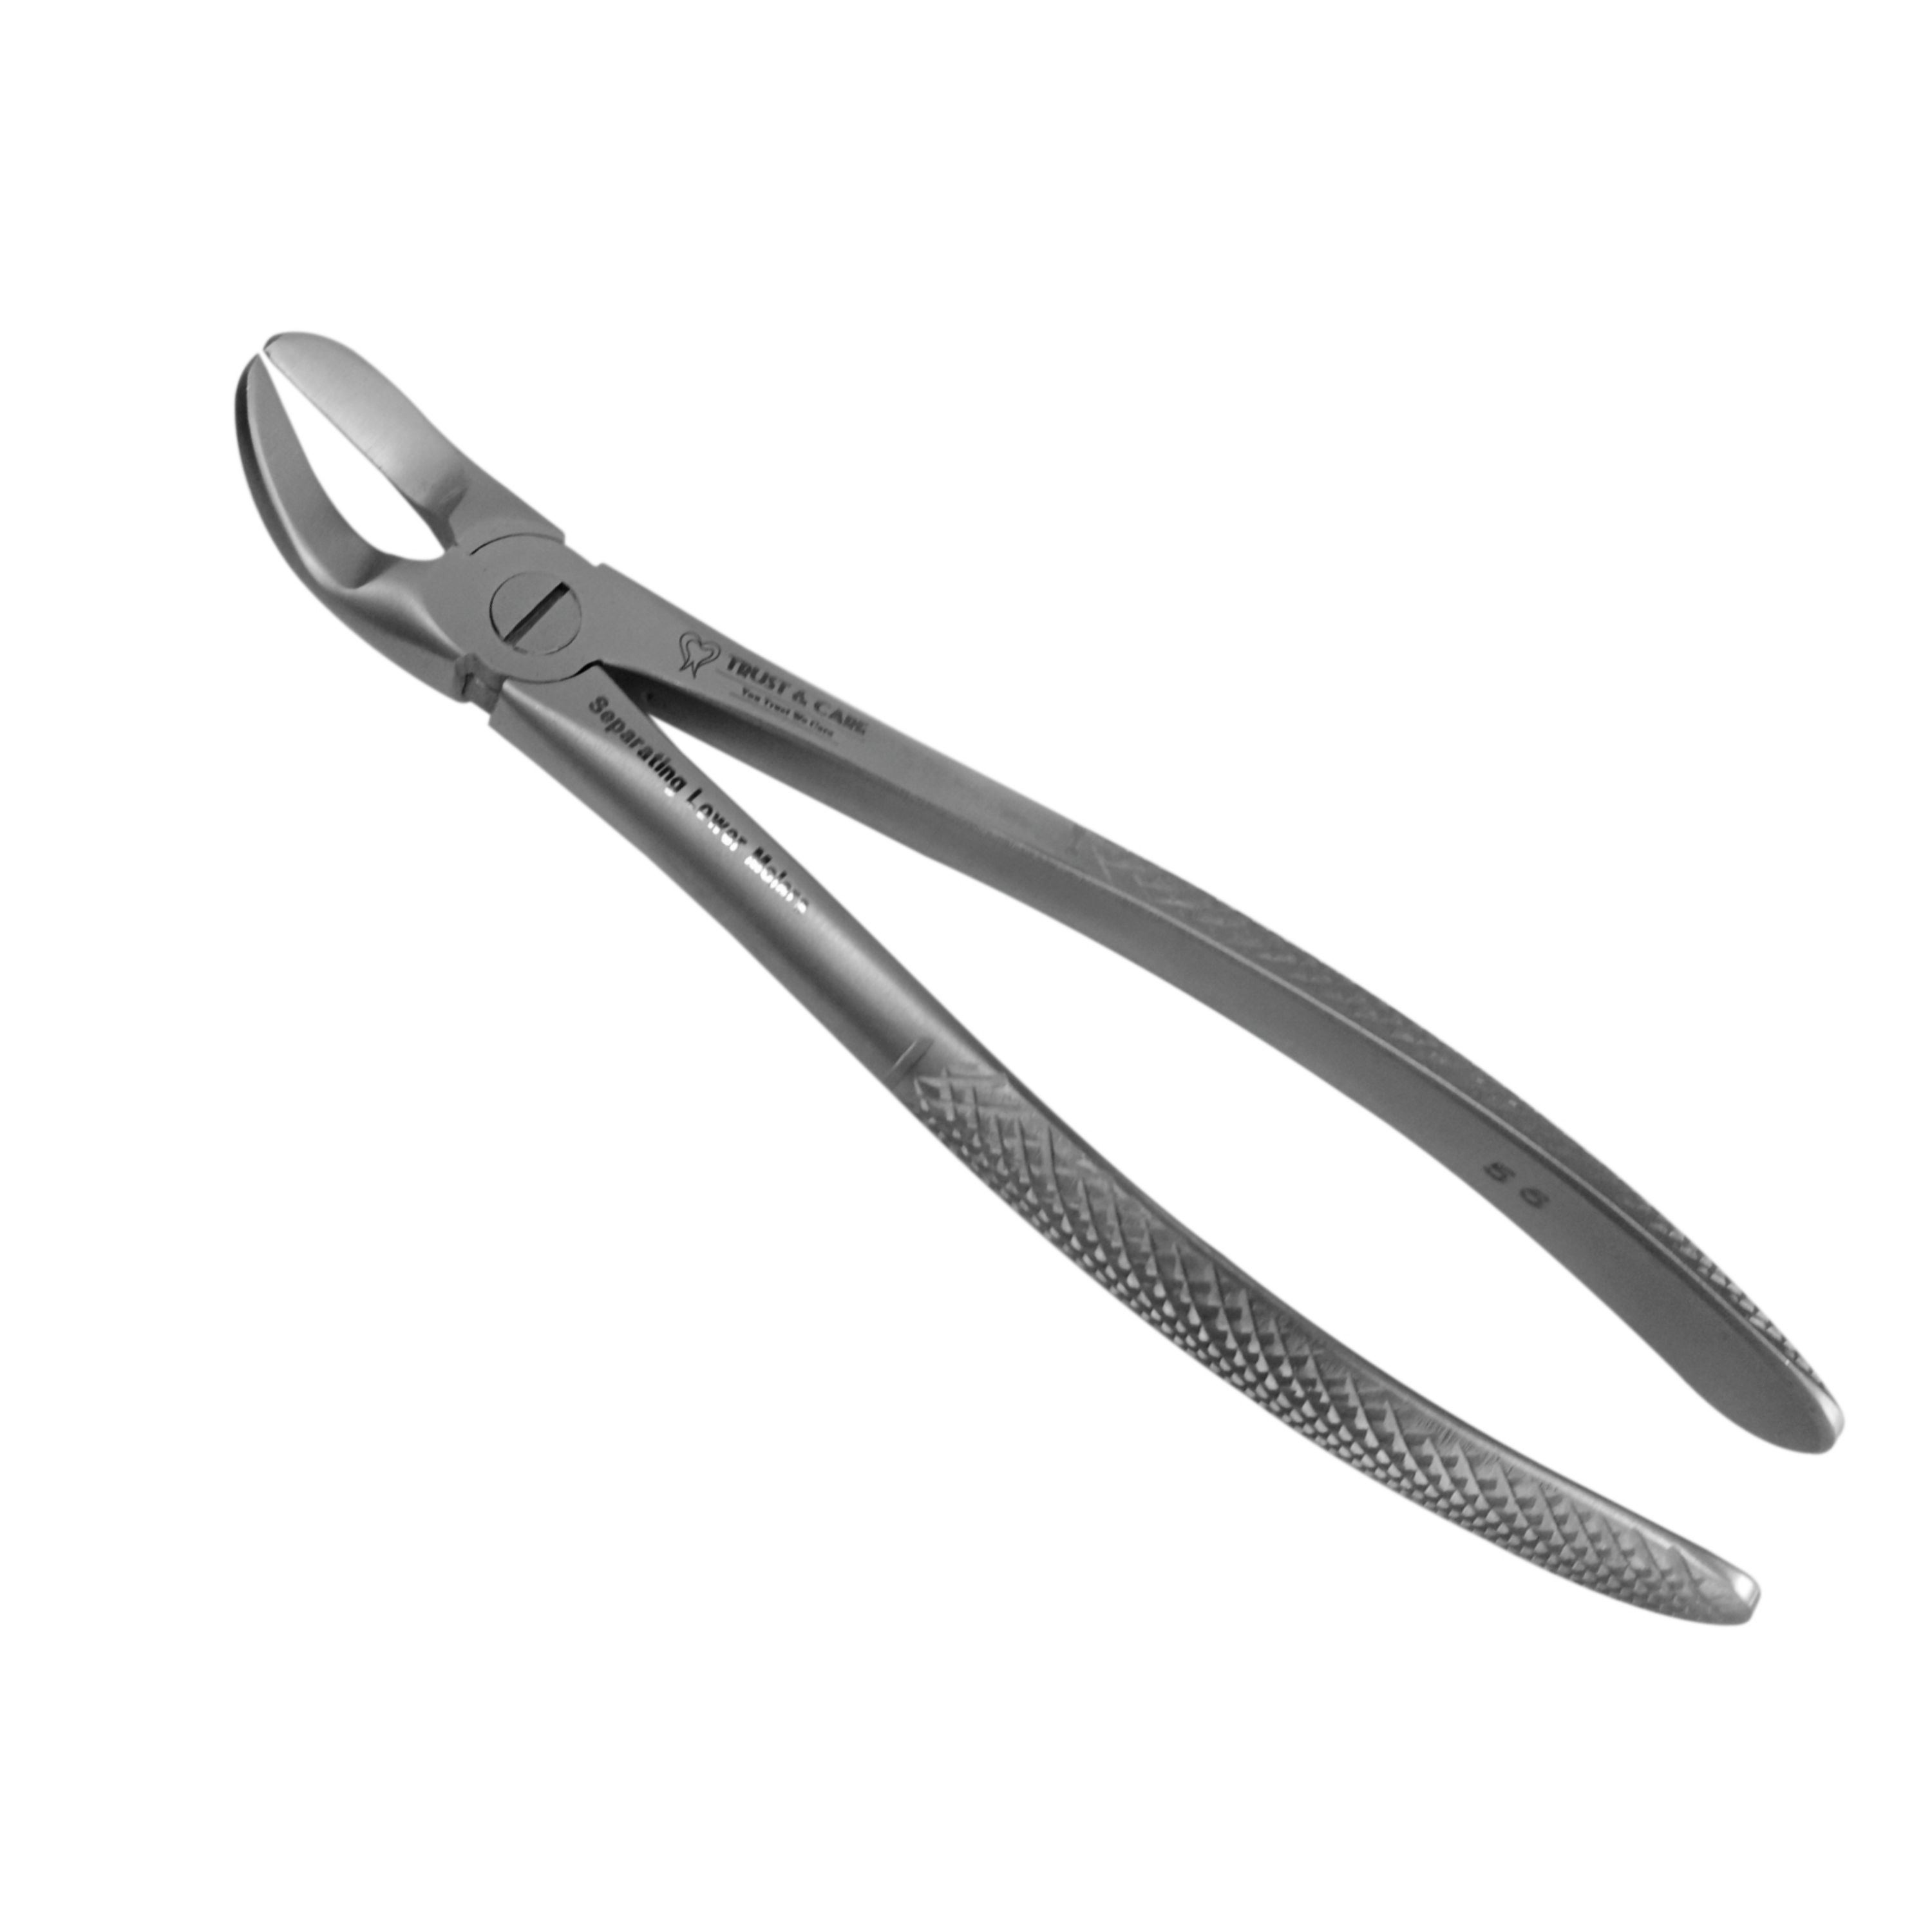 Trust & Care Tooth Extraction Forcep Seprating Lower Molars Fig No. 56 Standard